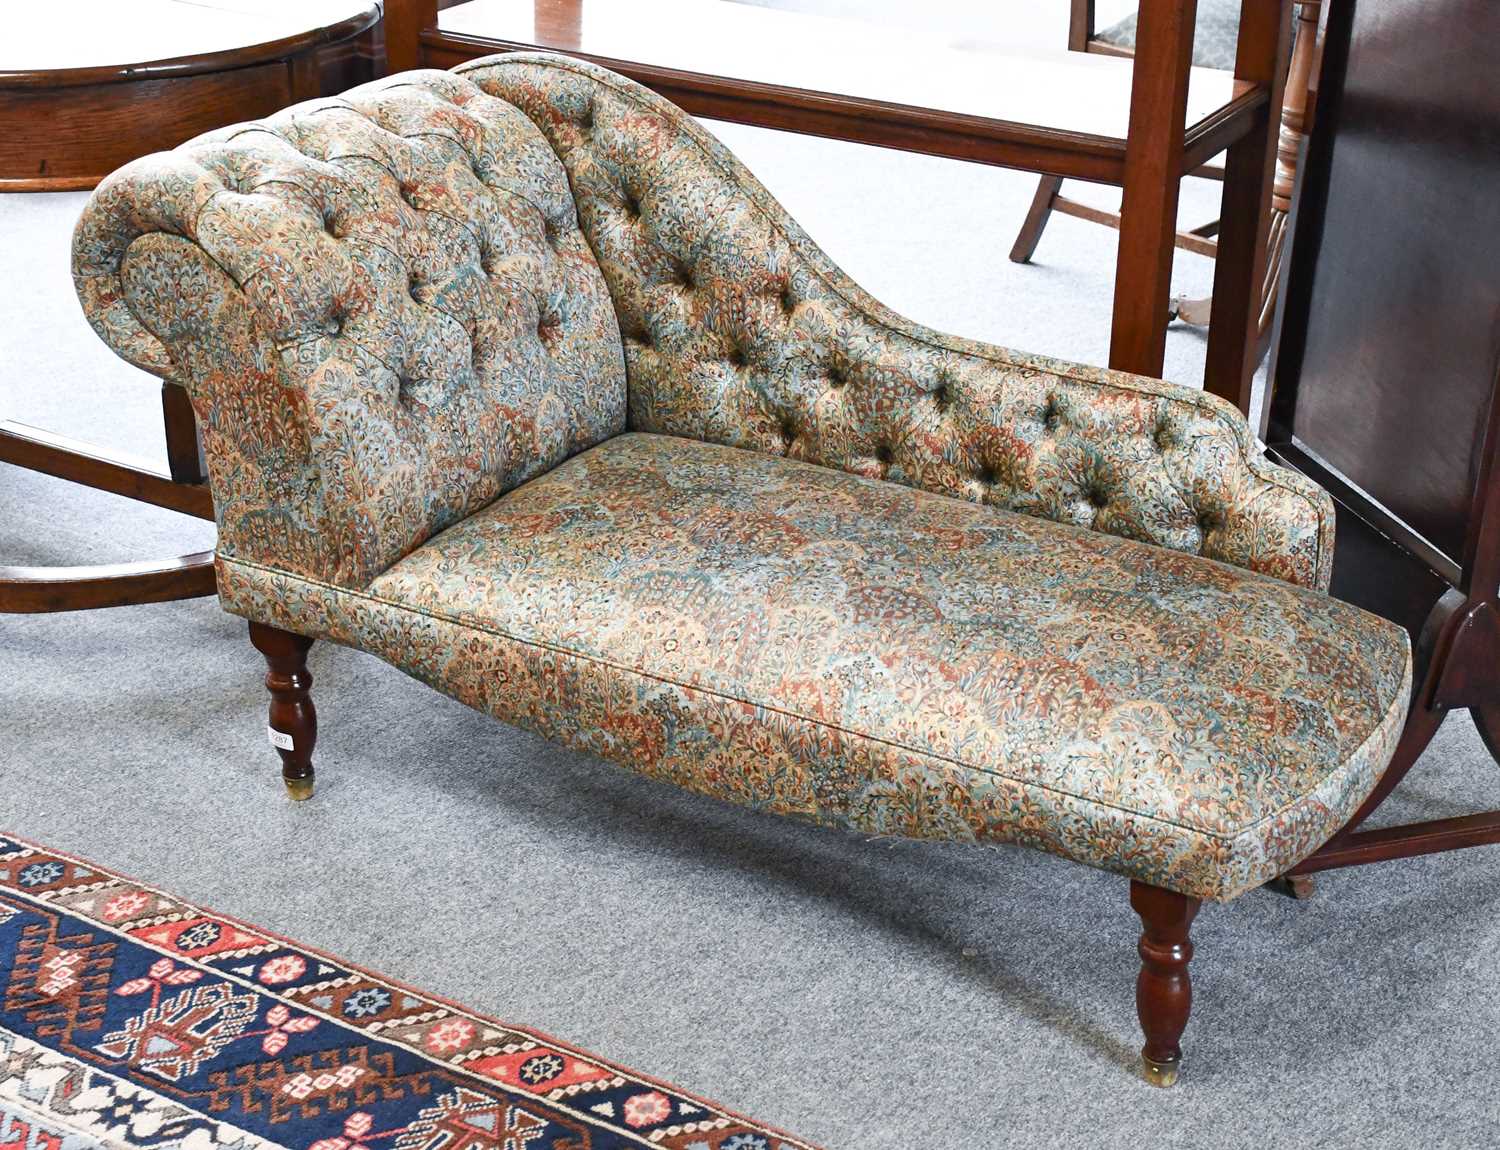 A Victorian Style Chaise Longue, with Liberty floral upholstery, 140cm long Supports are very